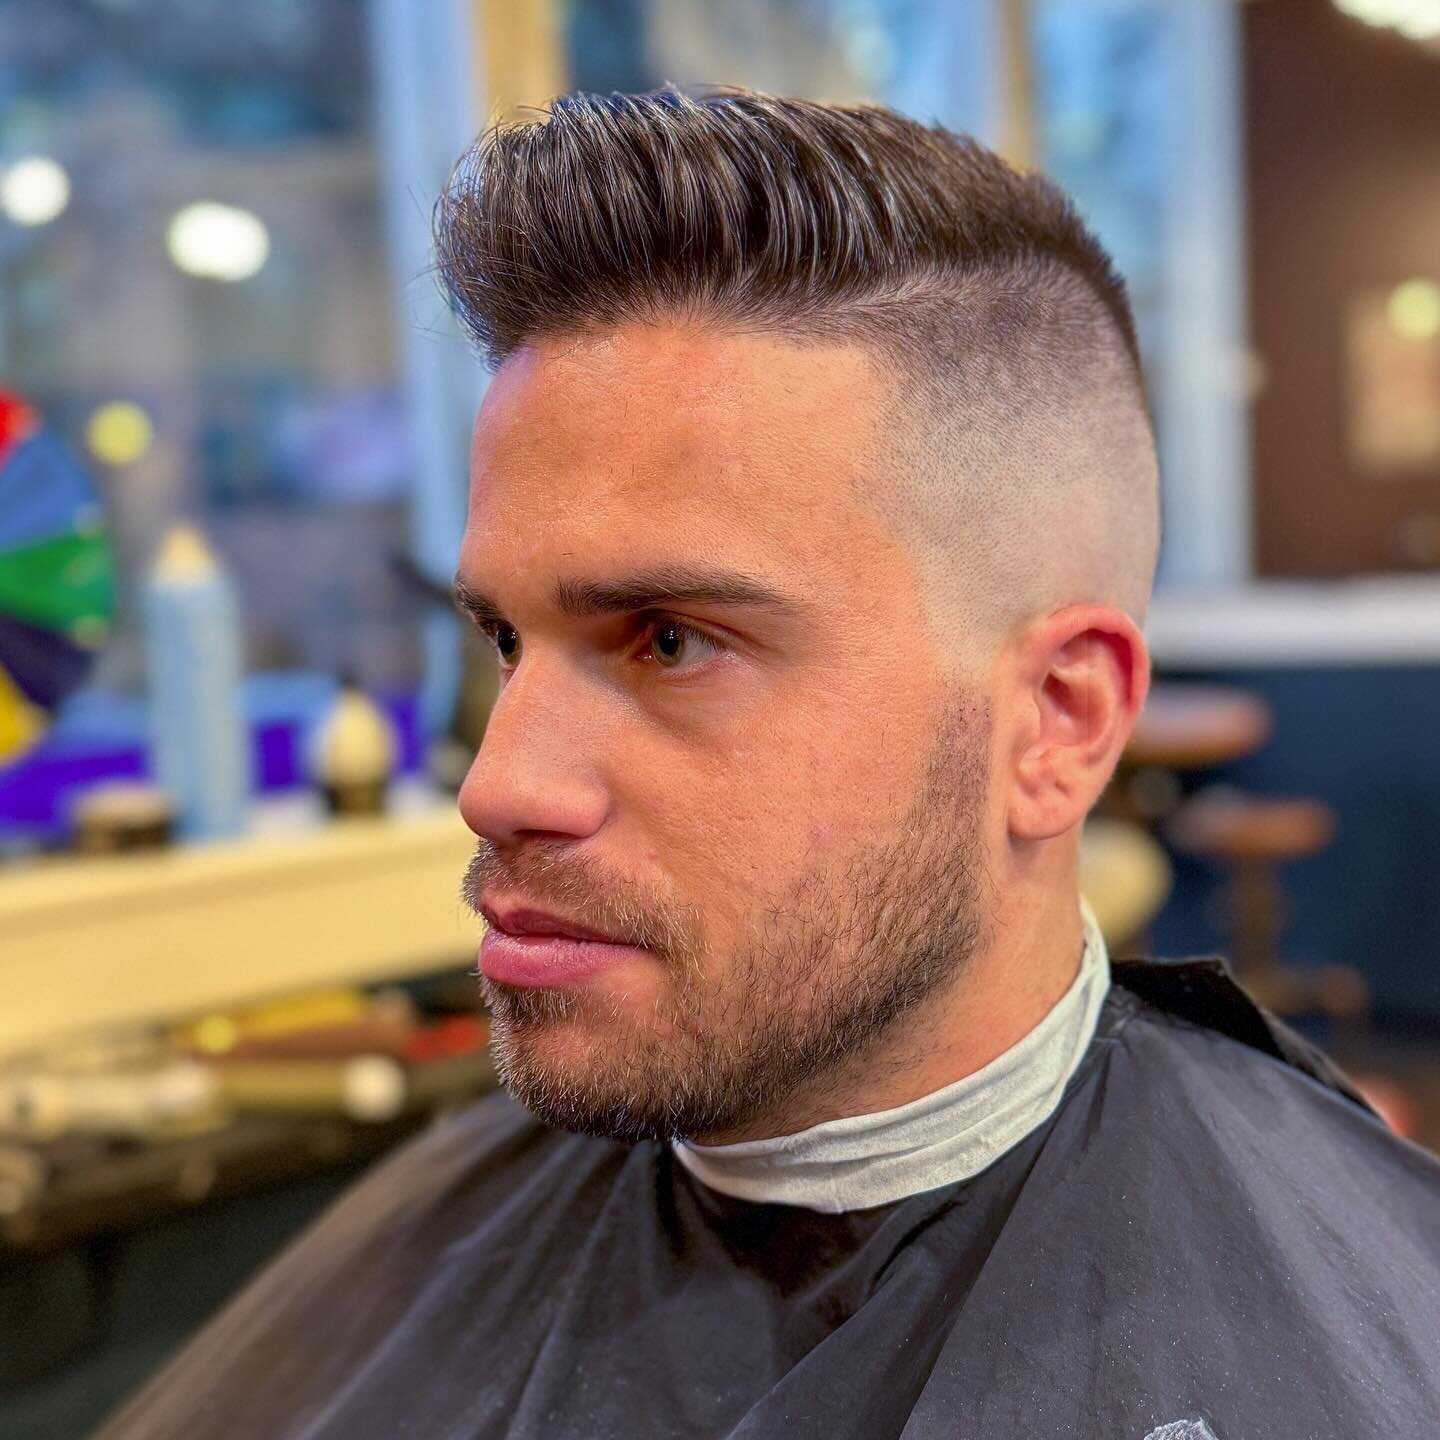 Lou Blanpain knows where to go for a kick ass fade. David in our Midtown shop faded him up high and tight. Buzzed the crown with a #2 blade and gradually blended it into six inches at the front.  We&rsquo;re calling this the Crewcut Pomp combo! 
.
#a